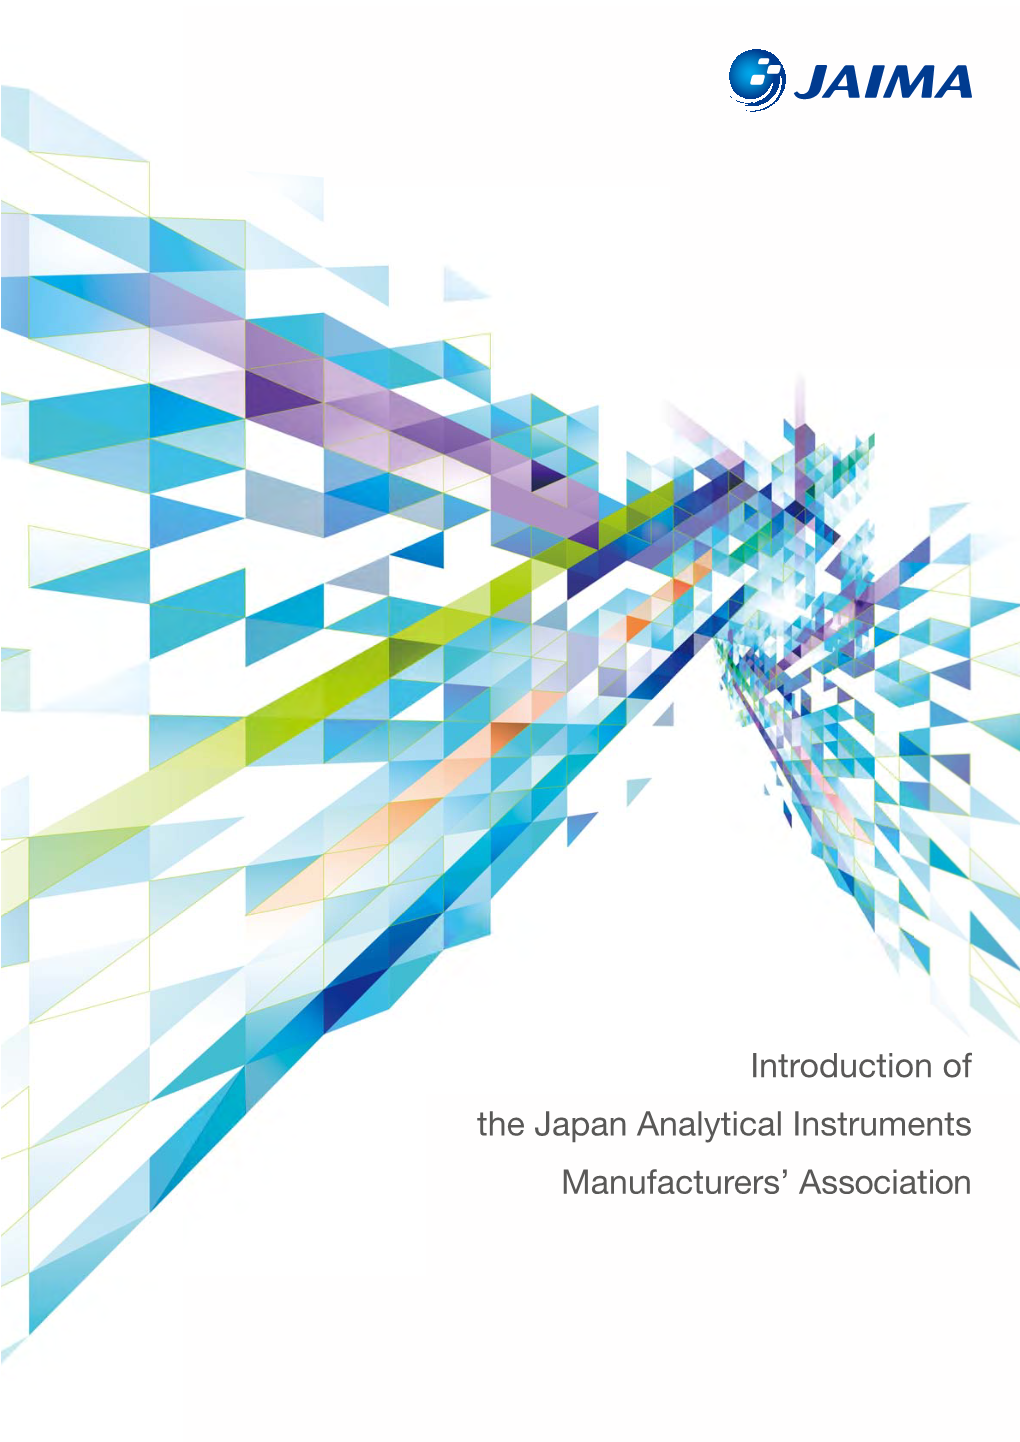 Introduction of the Japan Analytical Instruments Manufacturers